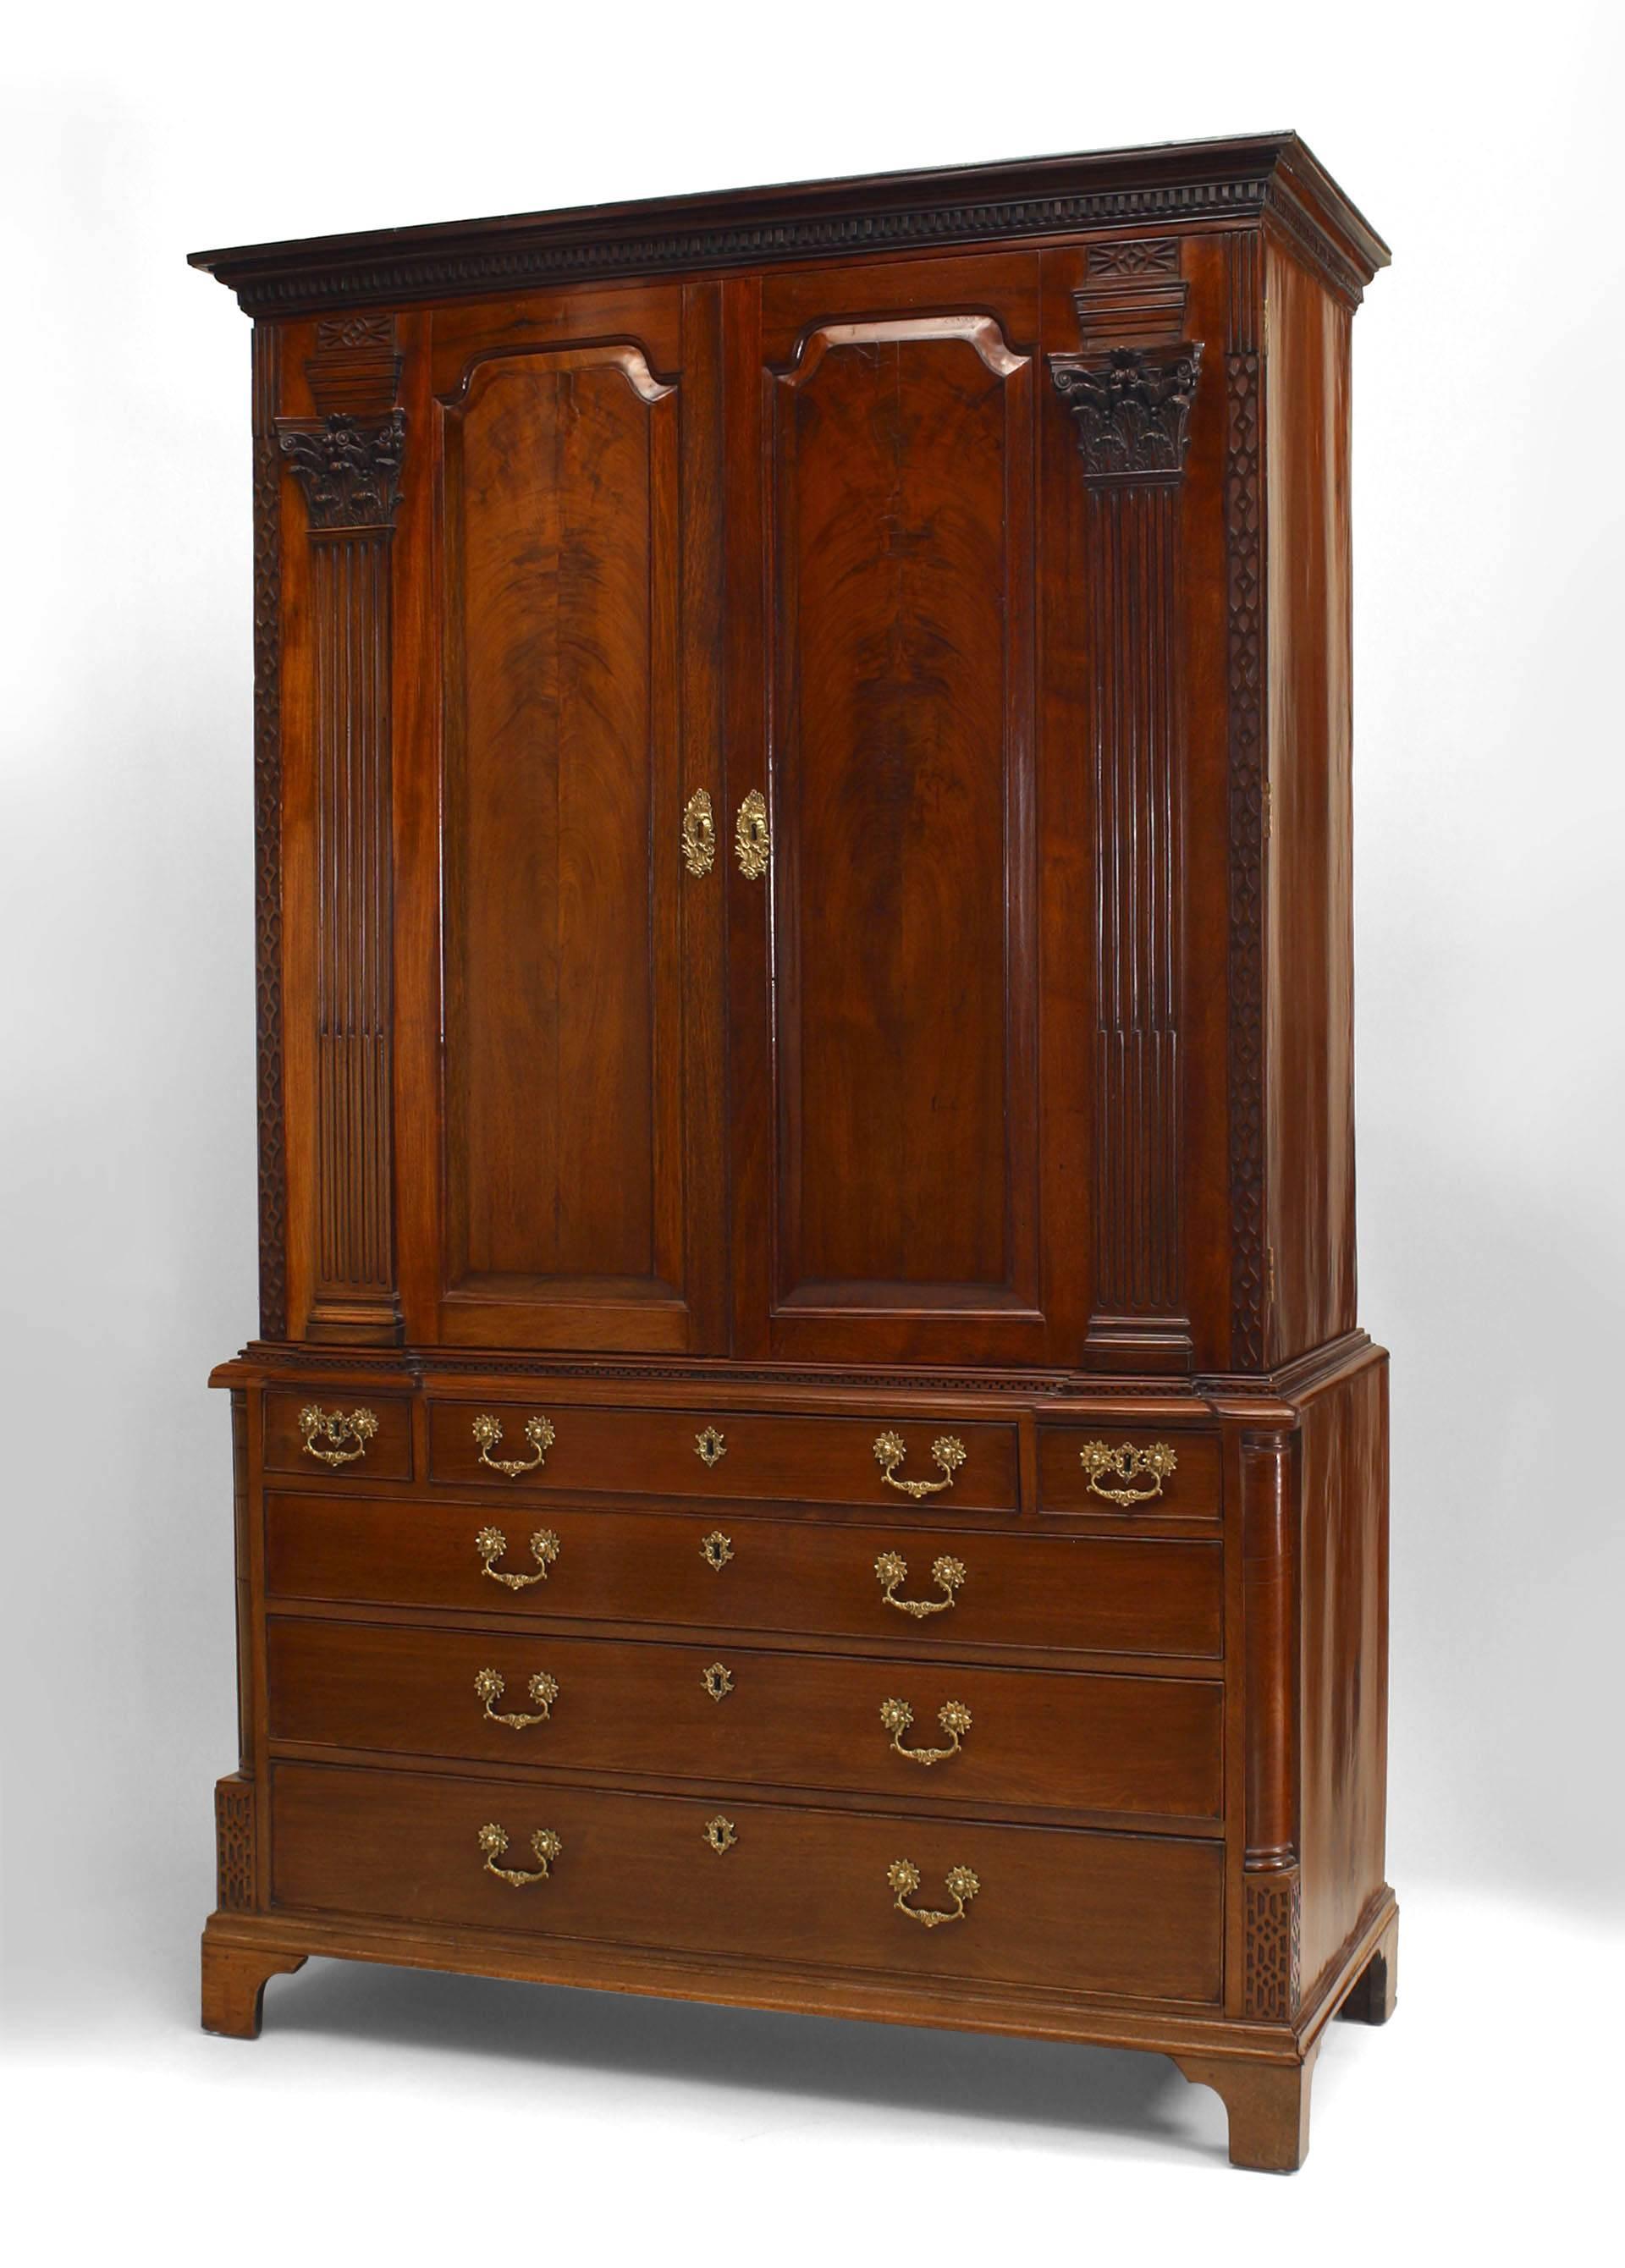 English Georgian (18th Century) mahogany cabinet with a lower section having 4 drawers and a 2 door upper section with carved pilaster columns and lattice sides.
